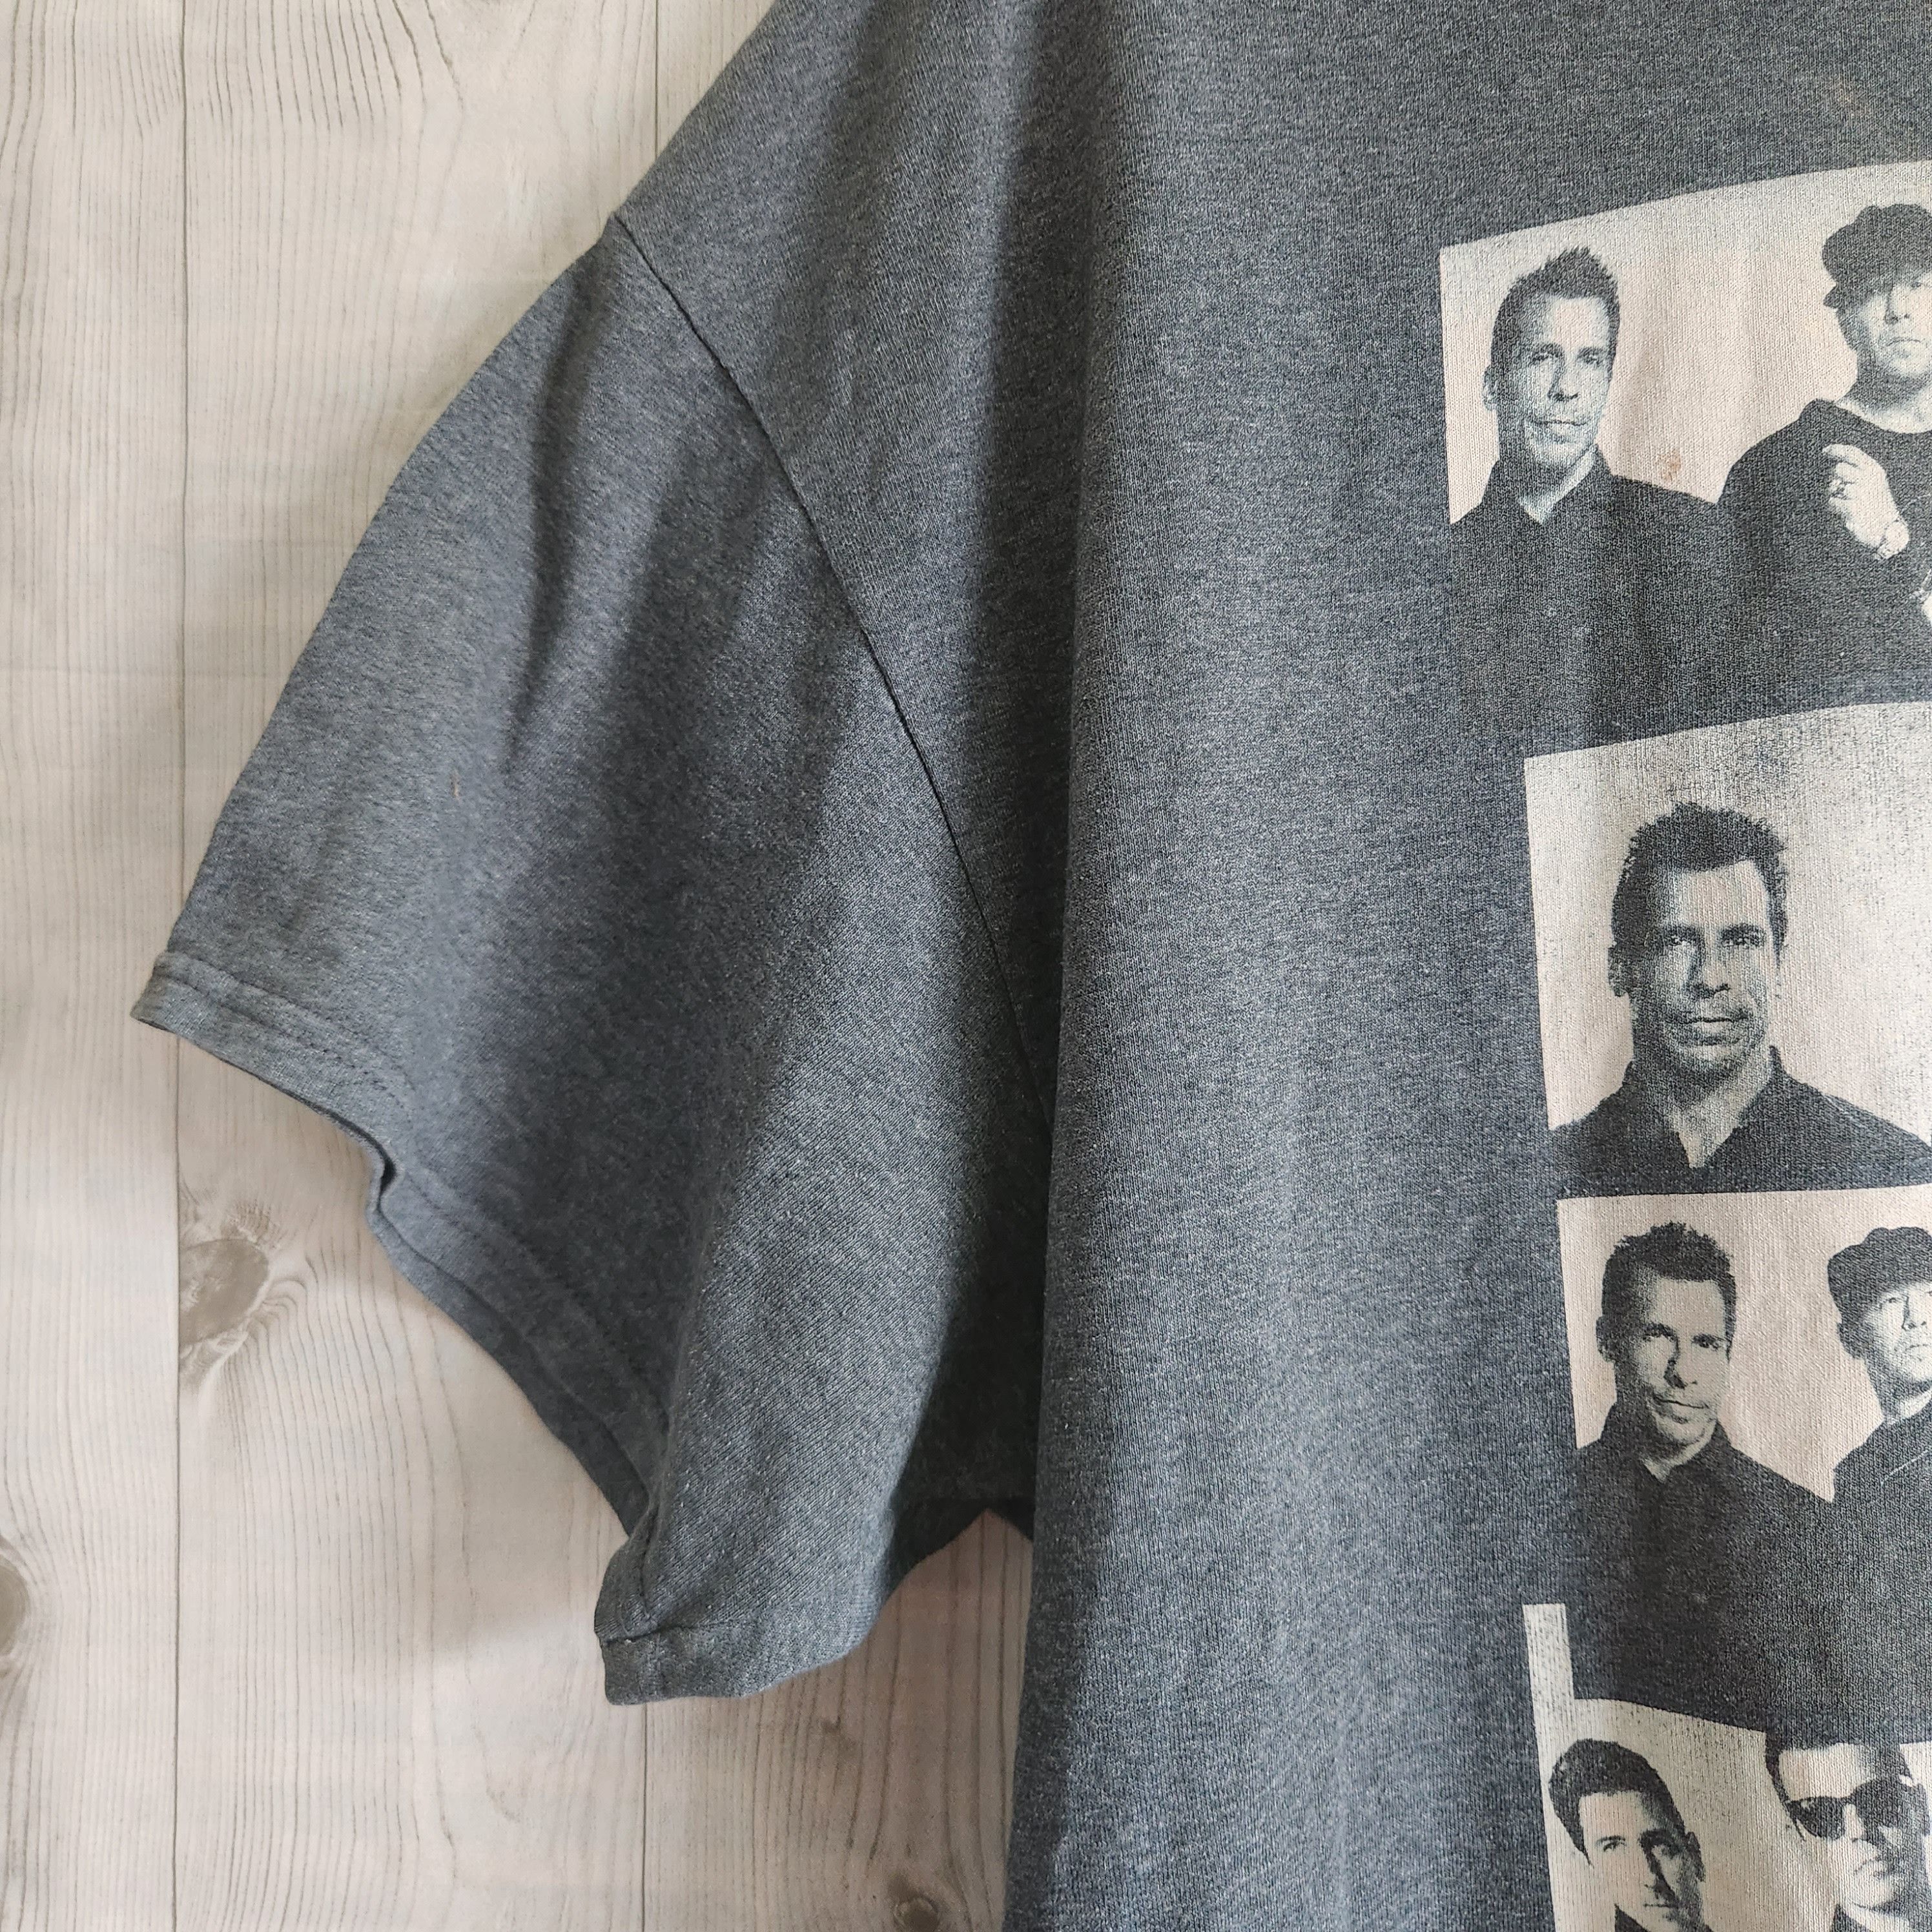 Band Tees - New Kids On The Block TShirt Copyright 2015 - 14